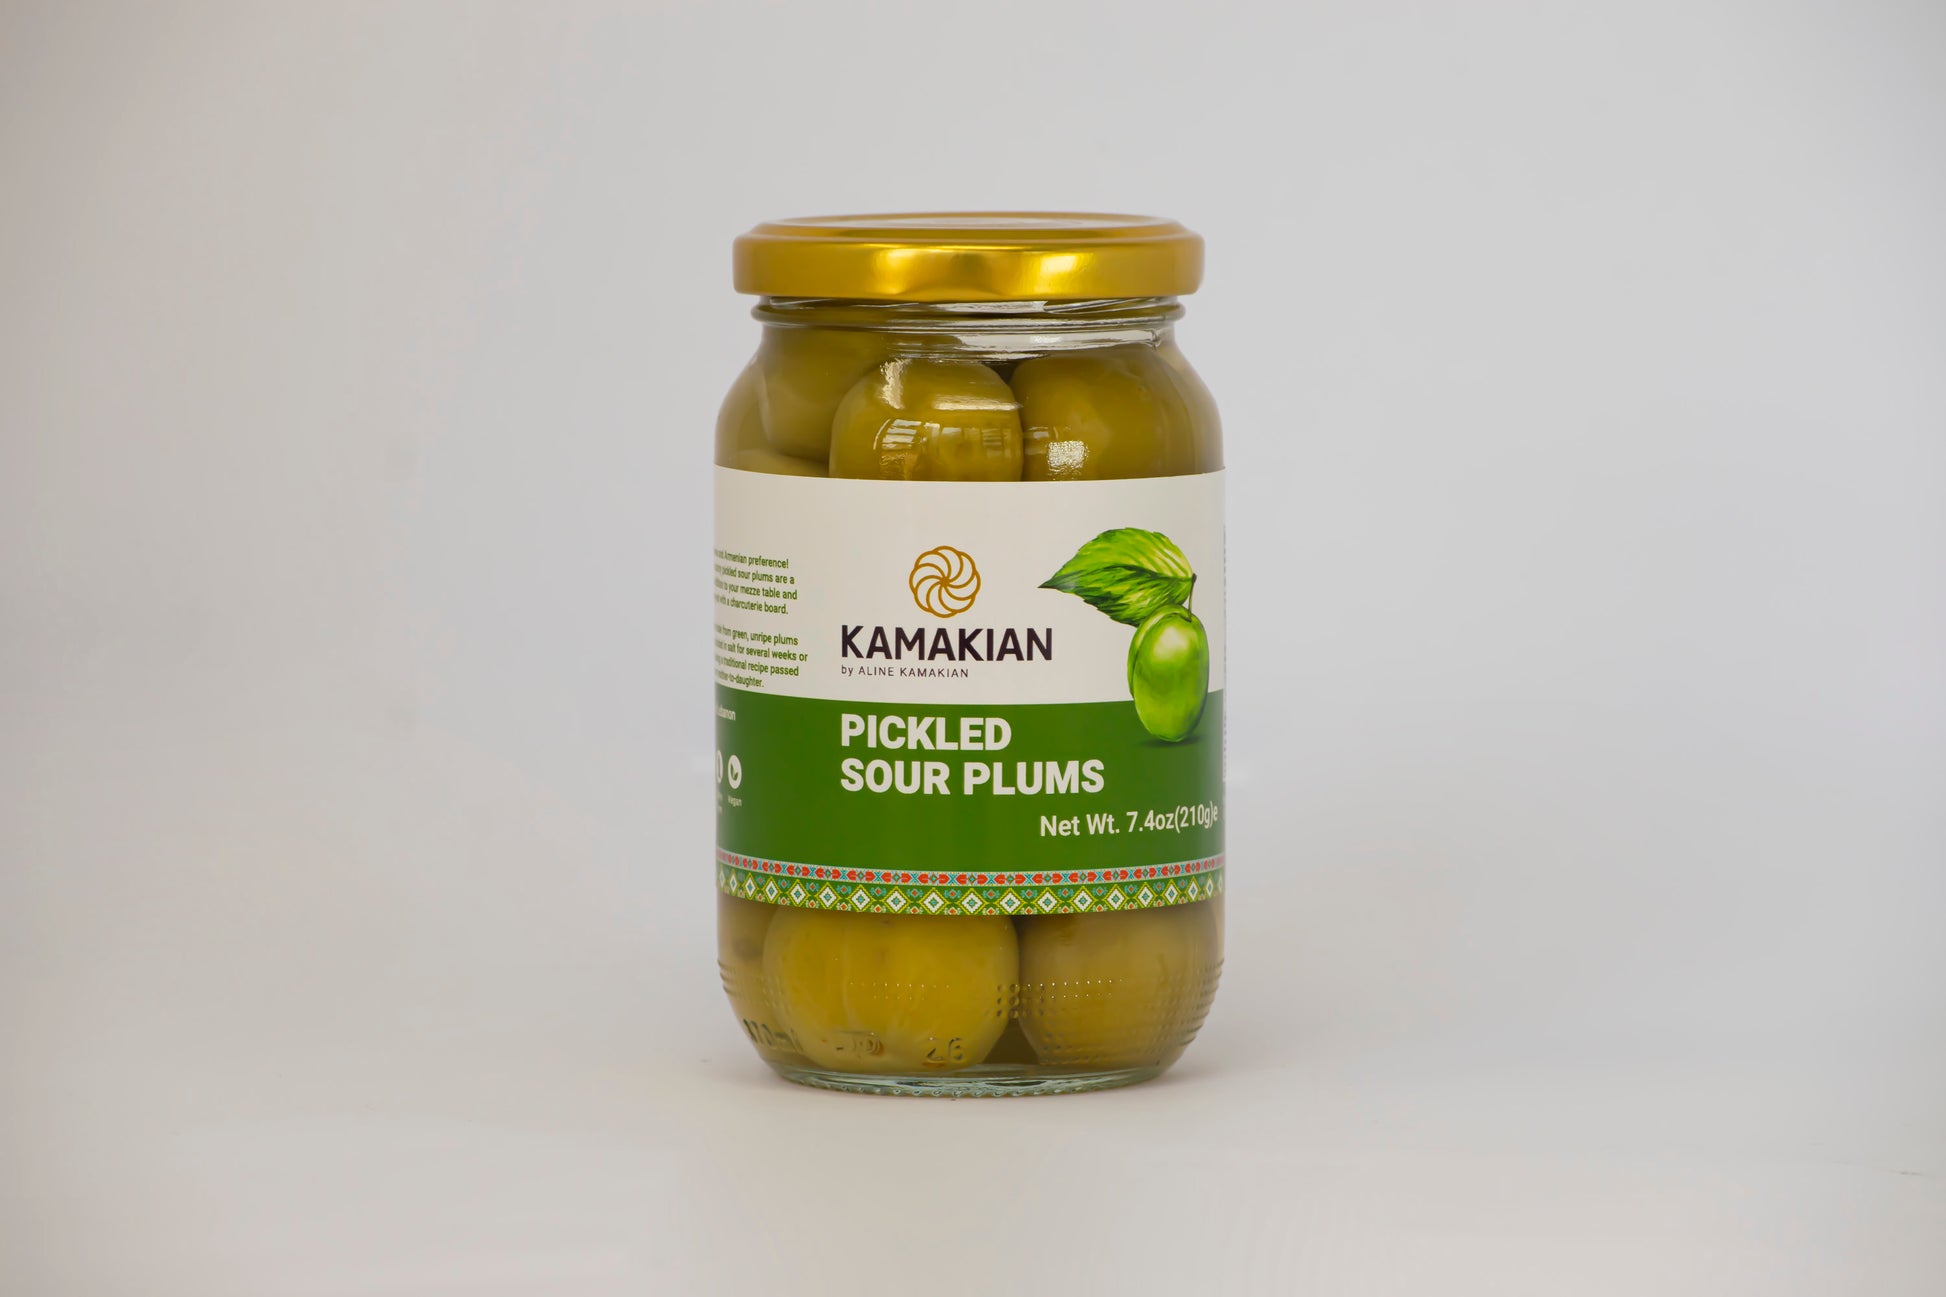 Pickled Sour Plums From Lebanon